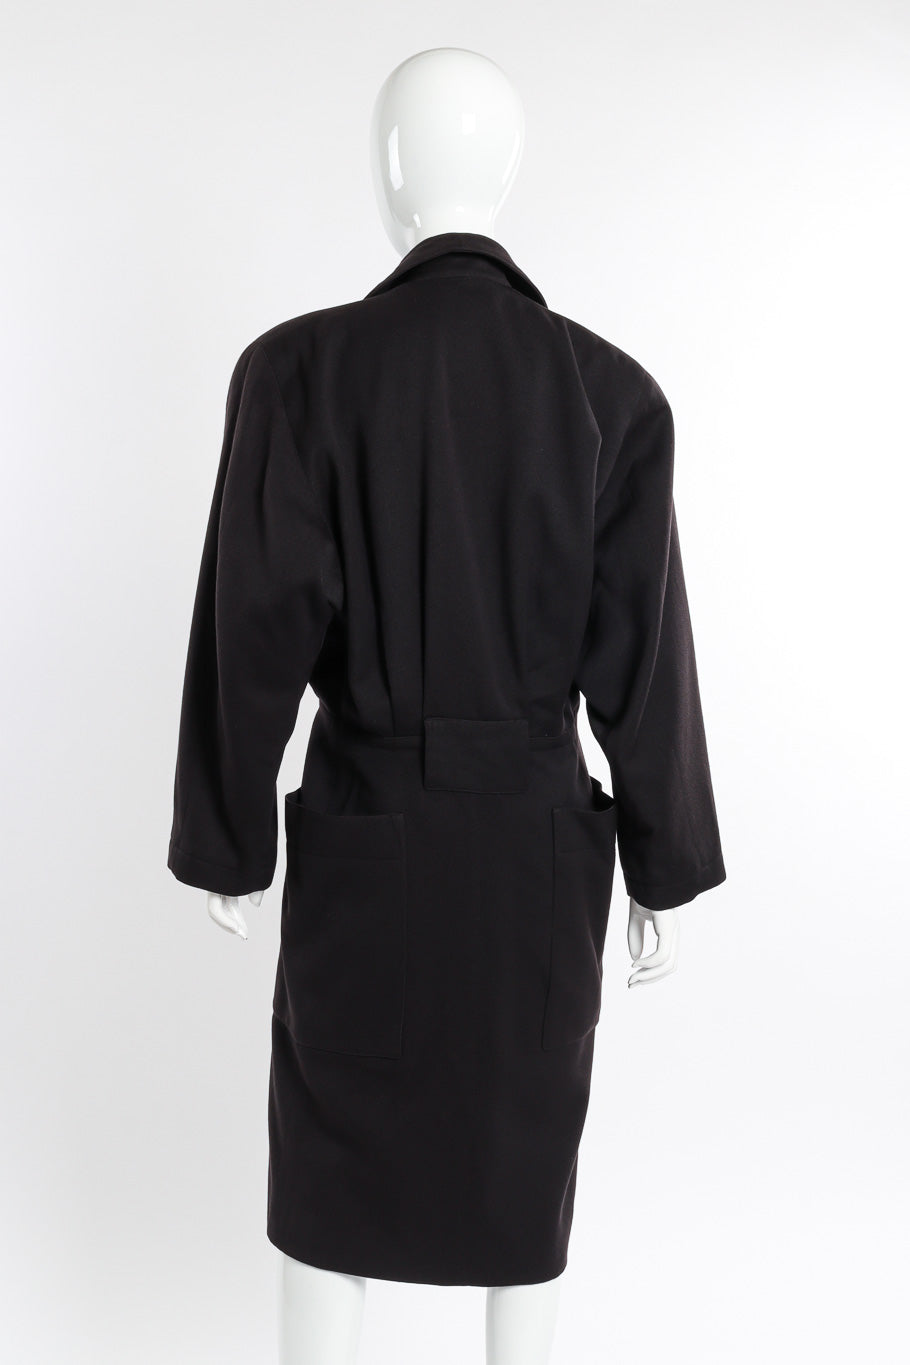 Vintage Alaia Oversized Double Breasted Wool Coat back view on mannequin @recessla